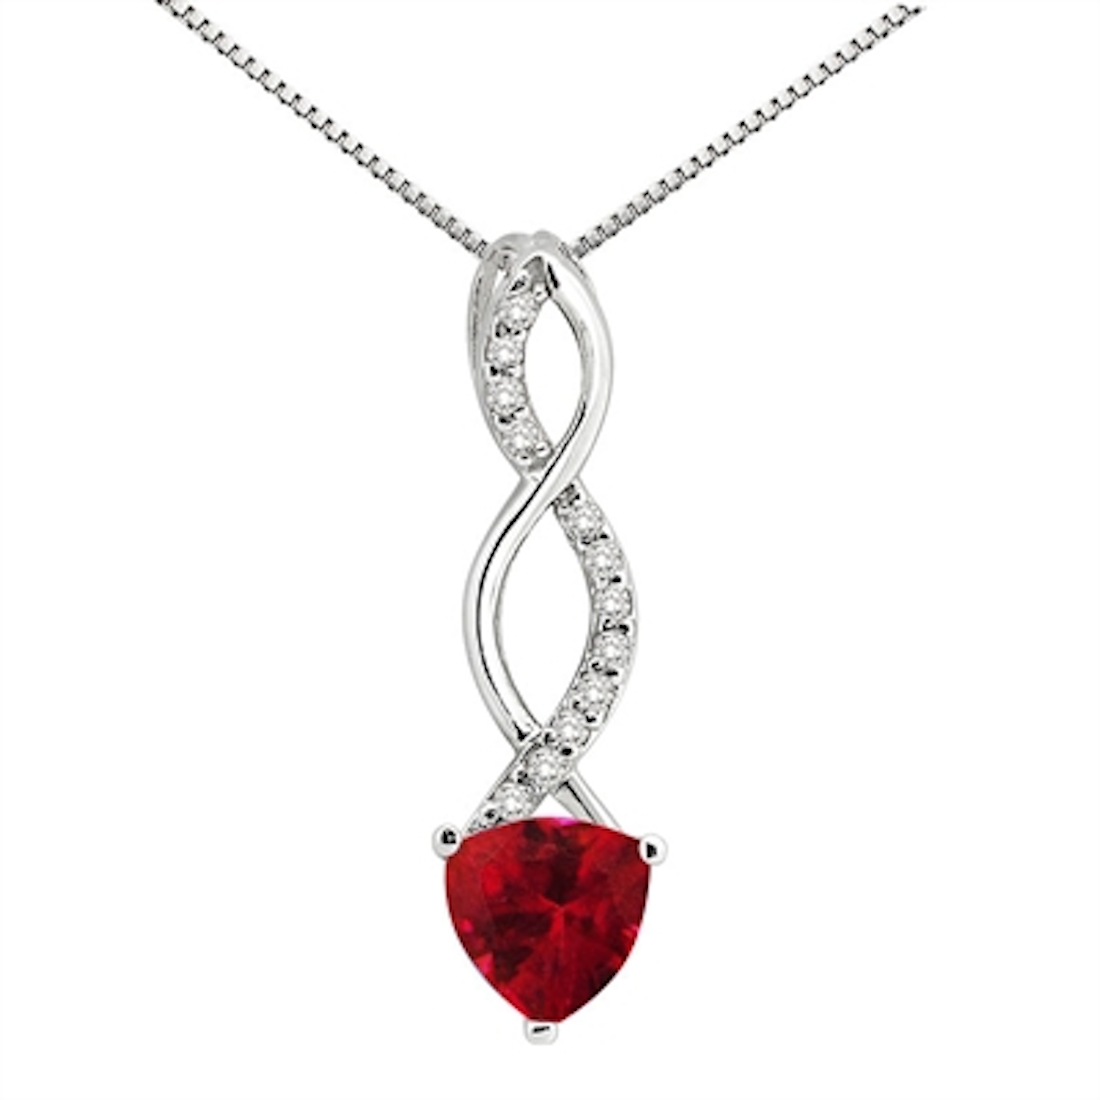 Aone 1.05Ct Trillion Shaped Lab Created Ruby and Diamond Pendant in 10K White Gold